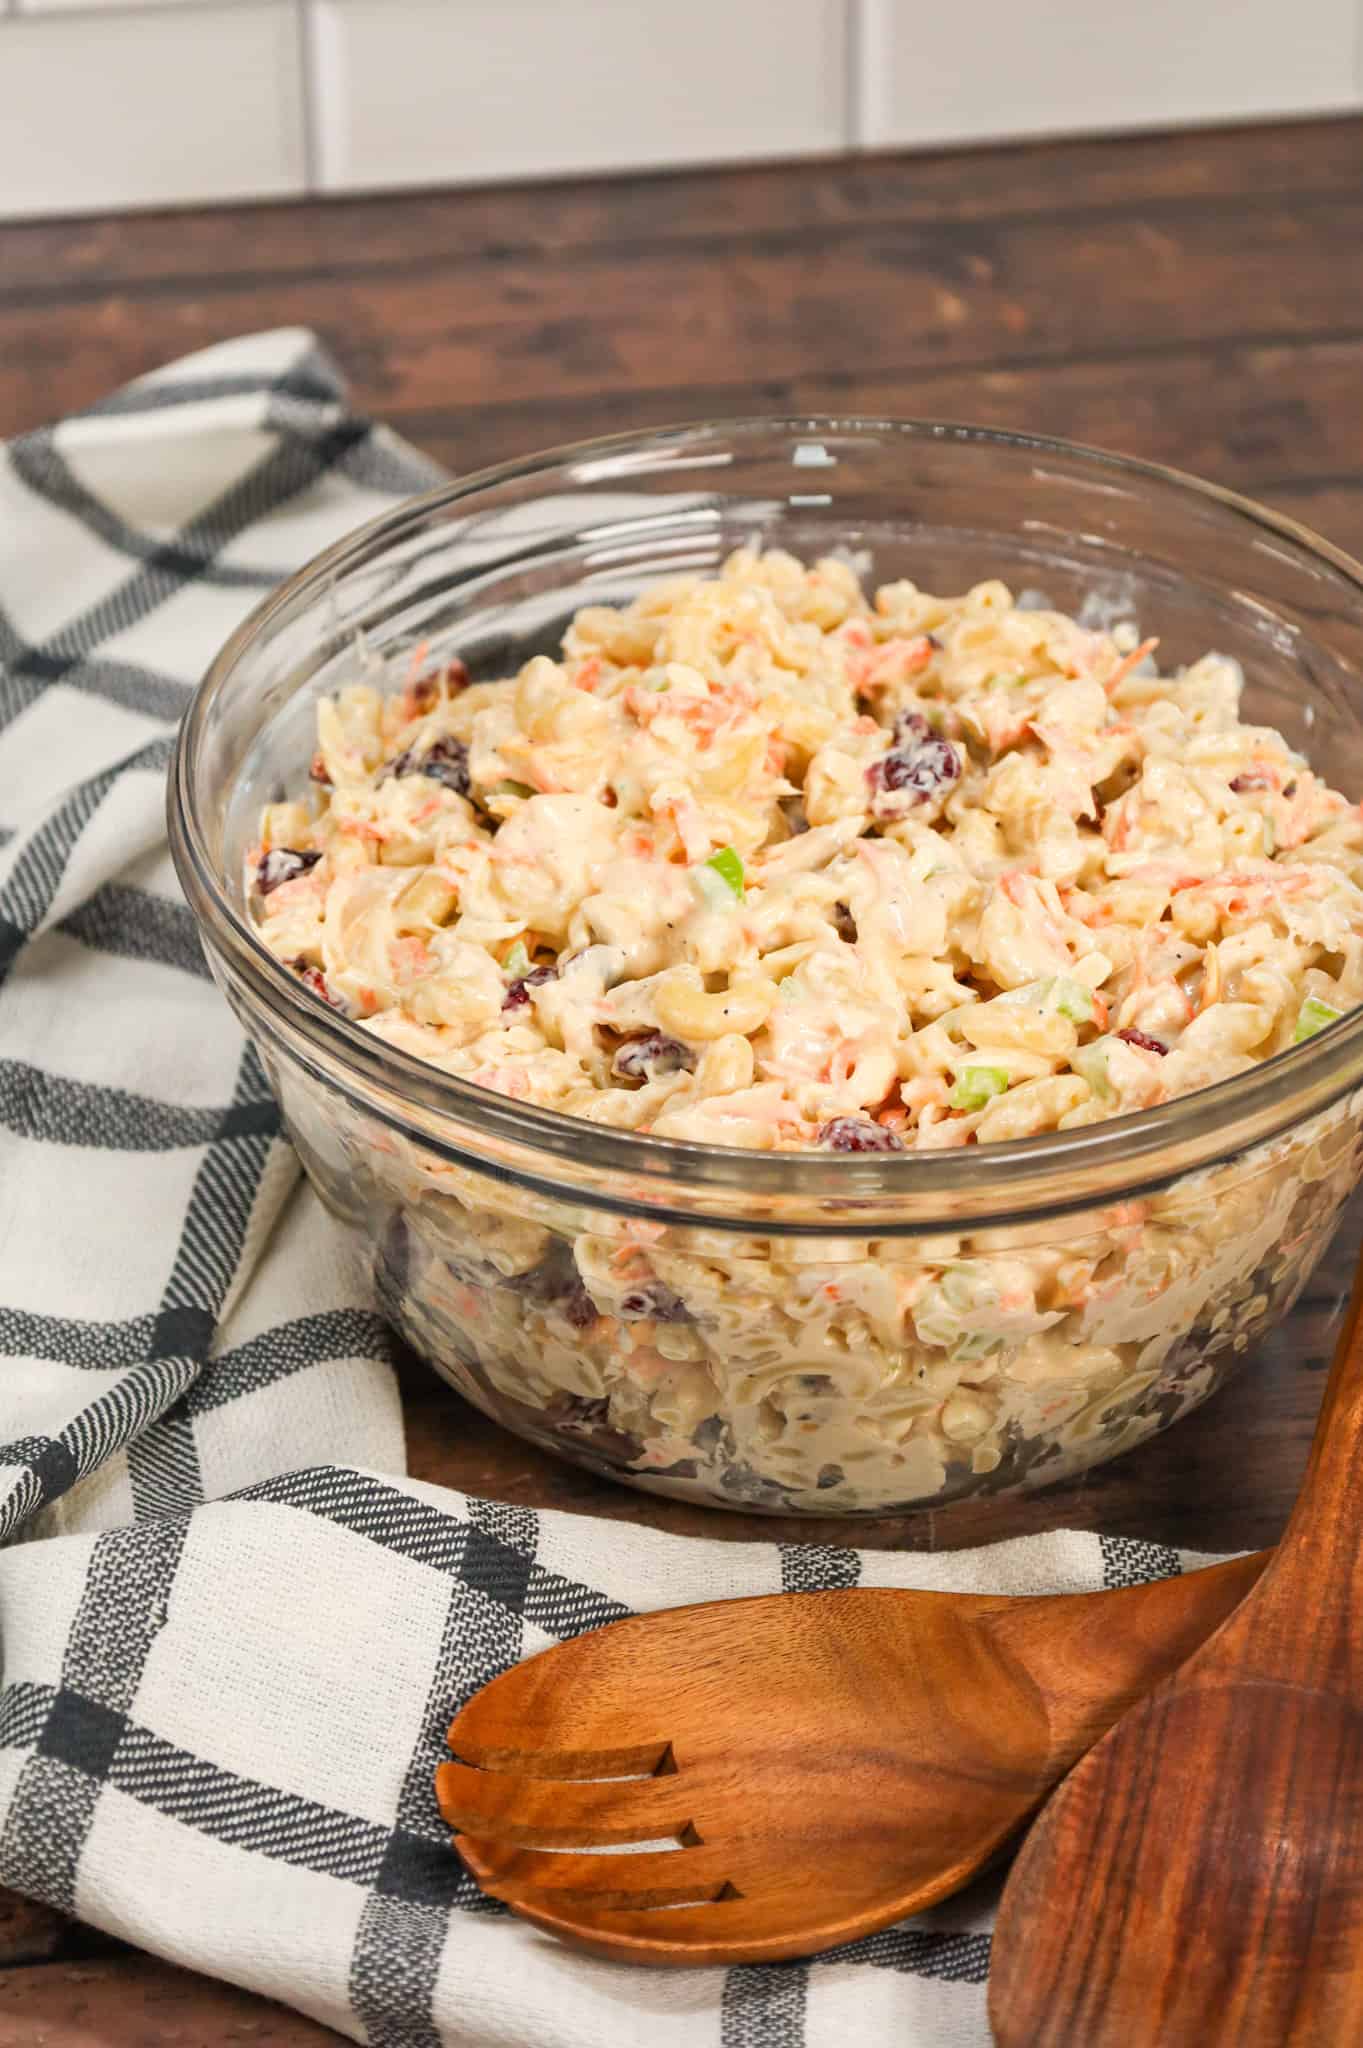 Chicken Macaroni Salad is a tasty pasta salad recipe loaded with carrots, onions, celery, mayo, chopped chicken, dried cranberries and shredded cheddar cheese.